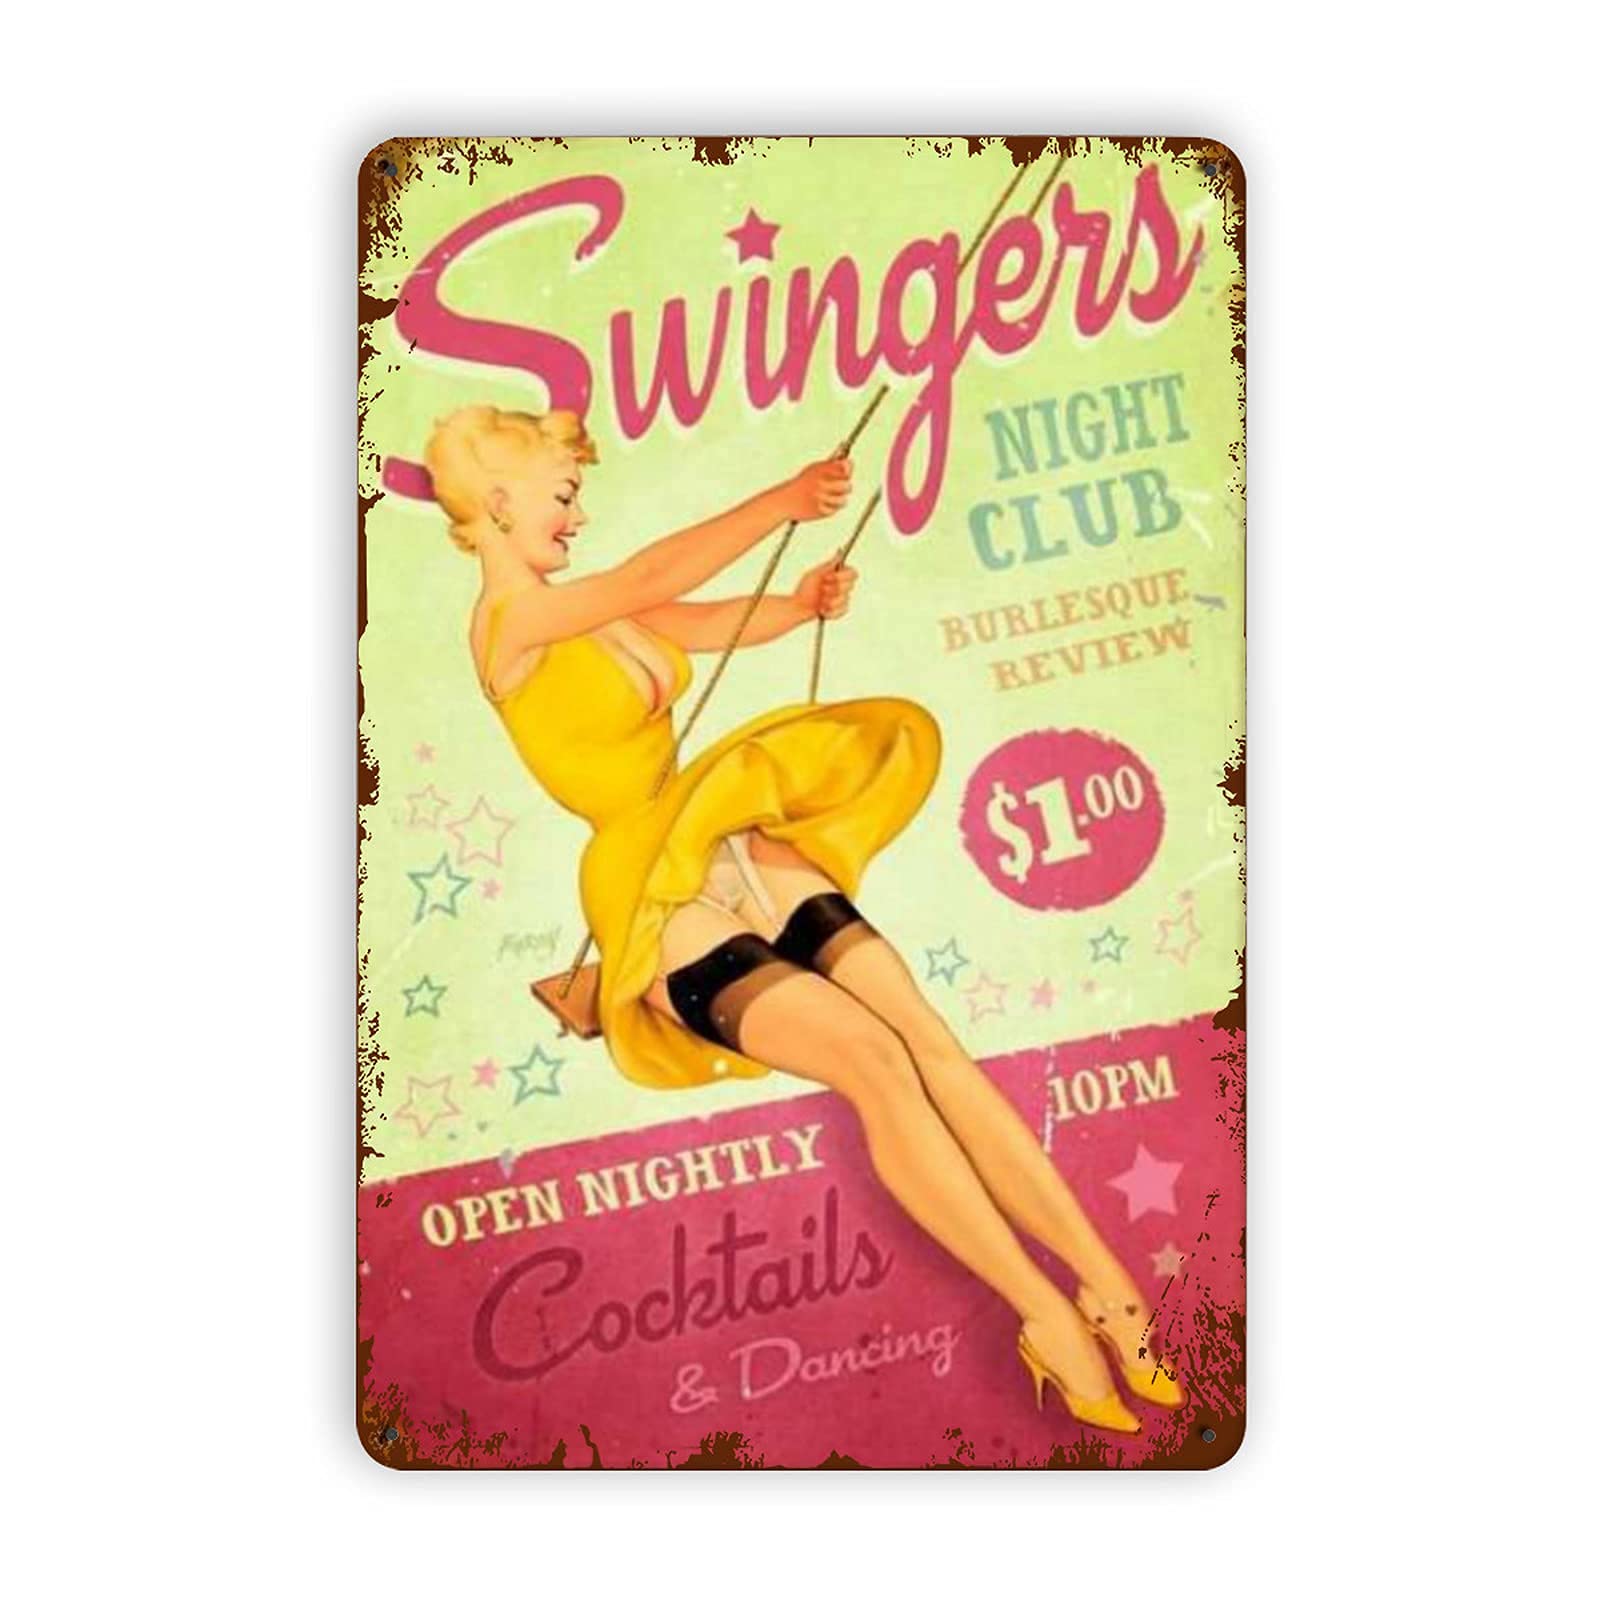 cindy java recommends dc swingers clubs pic